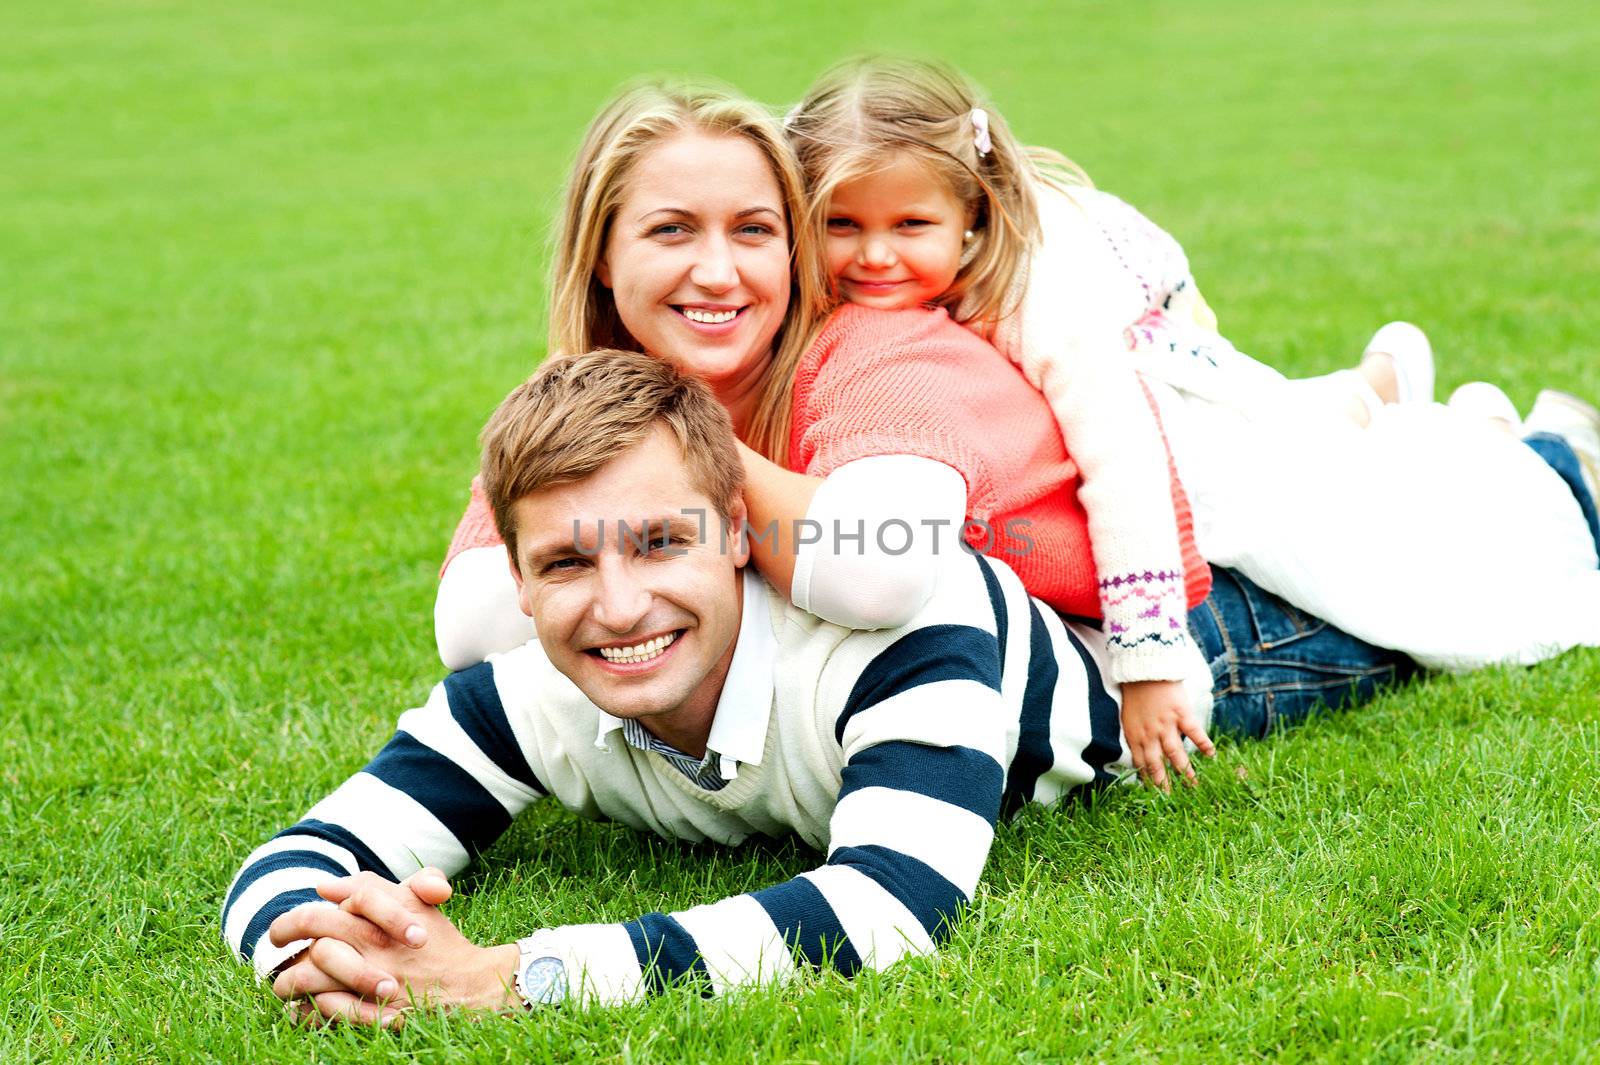 Young mother sandwiched between her daughter and husband. Photogenic family of three